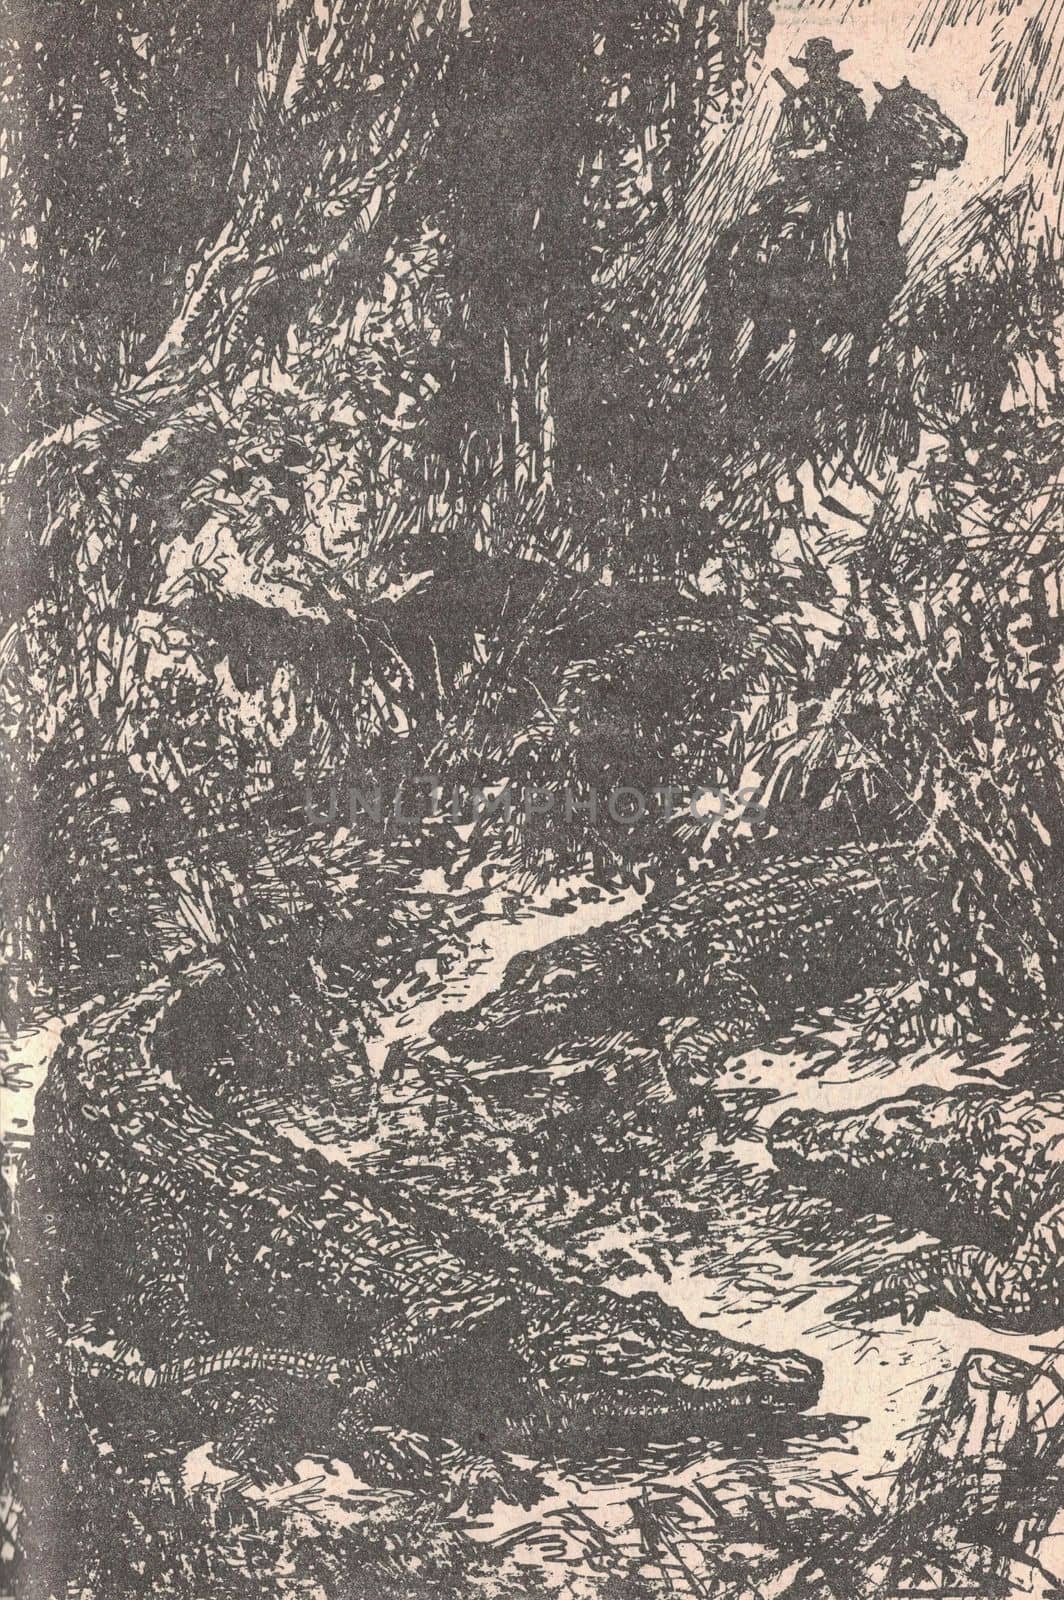 Black and white illustration shows a man on horseback in a jungle full of crocodiles. Drawing shows a South American rainforest. Vintage black and white picture shows adventure life in the previous century. Life in the 19th century by roman_nerud